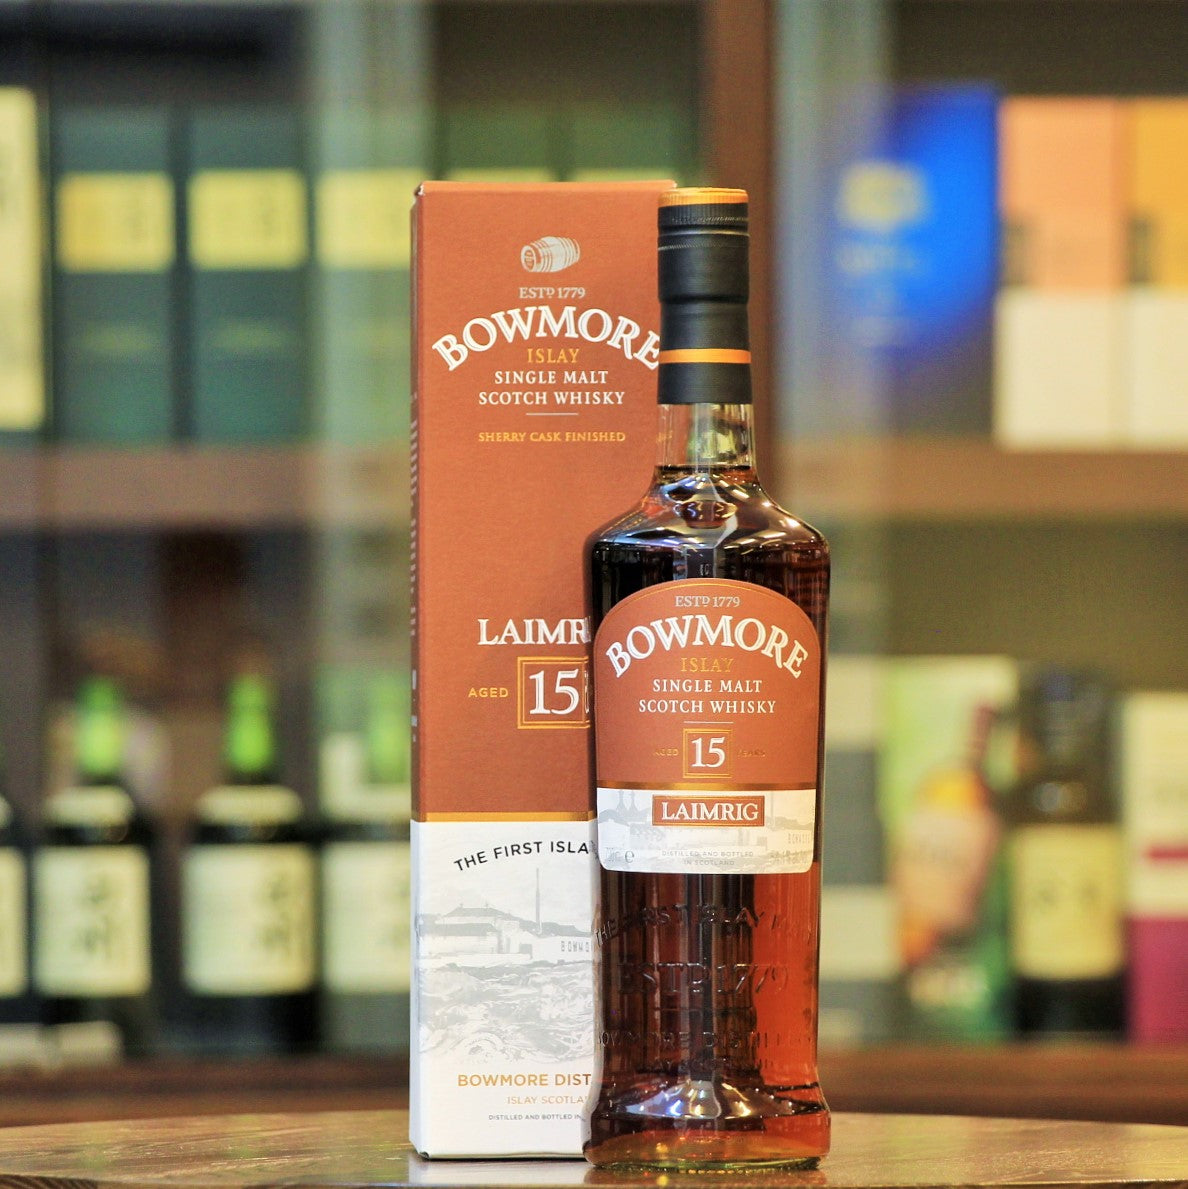 Matured for 15 years in Spanish Sherry Oak Casks (Butts) at the legendary No.1 Vaults (the oldest maturation Warehouse in Scotland and the only one below sea level) of Bowmore, Laimrig is Gaelic for "Pier". This bottling was released in 2014.